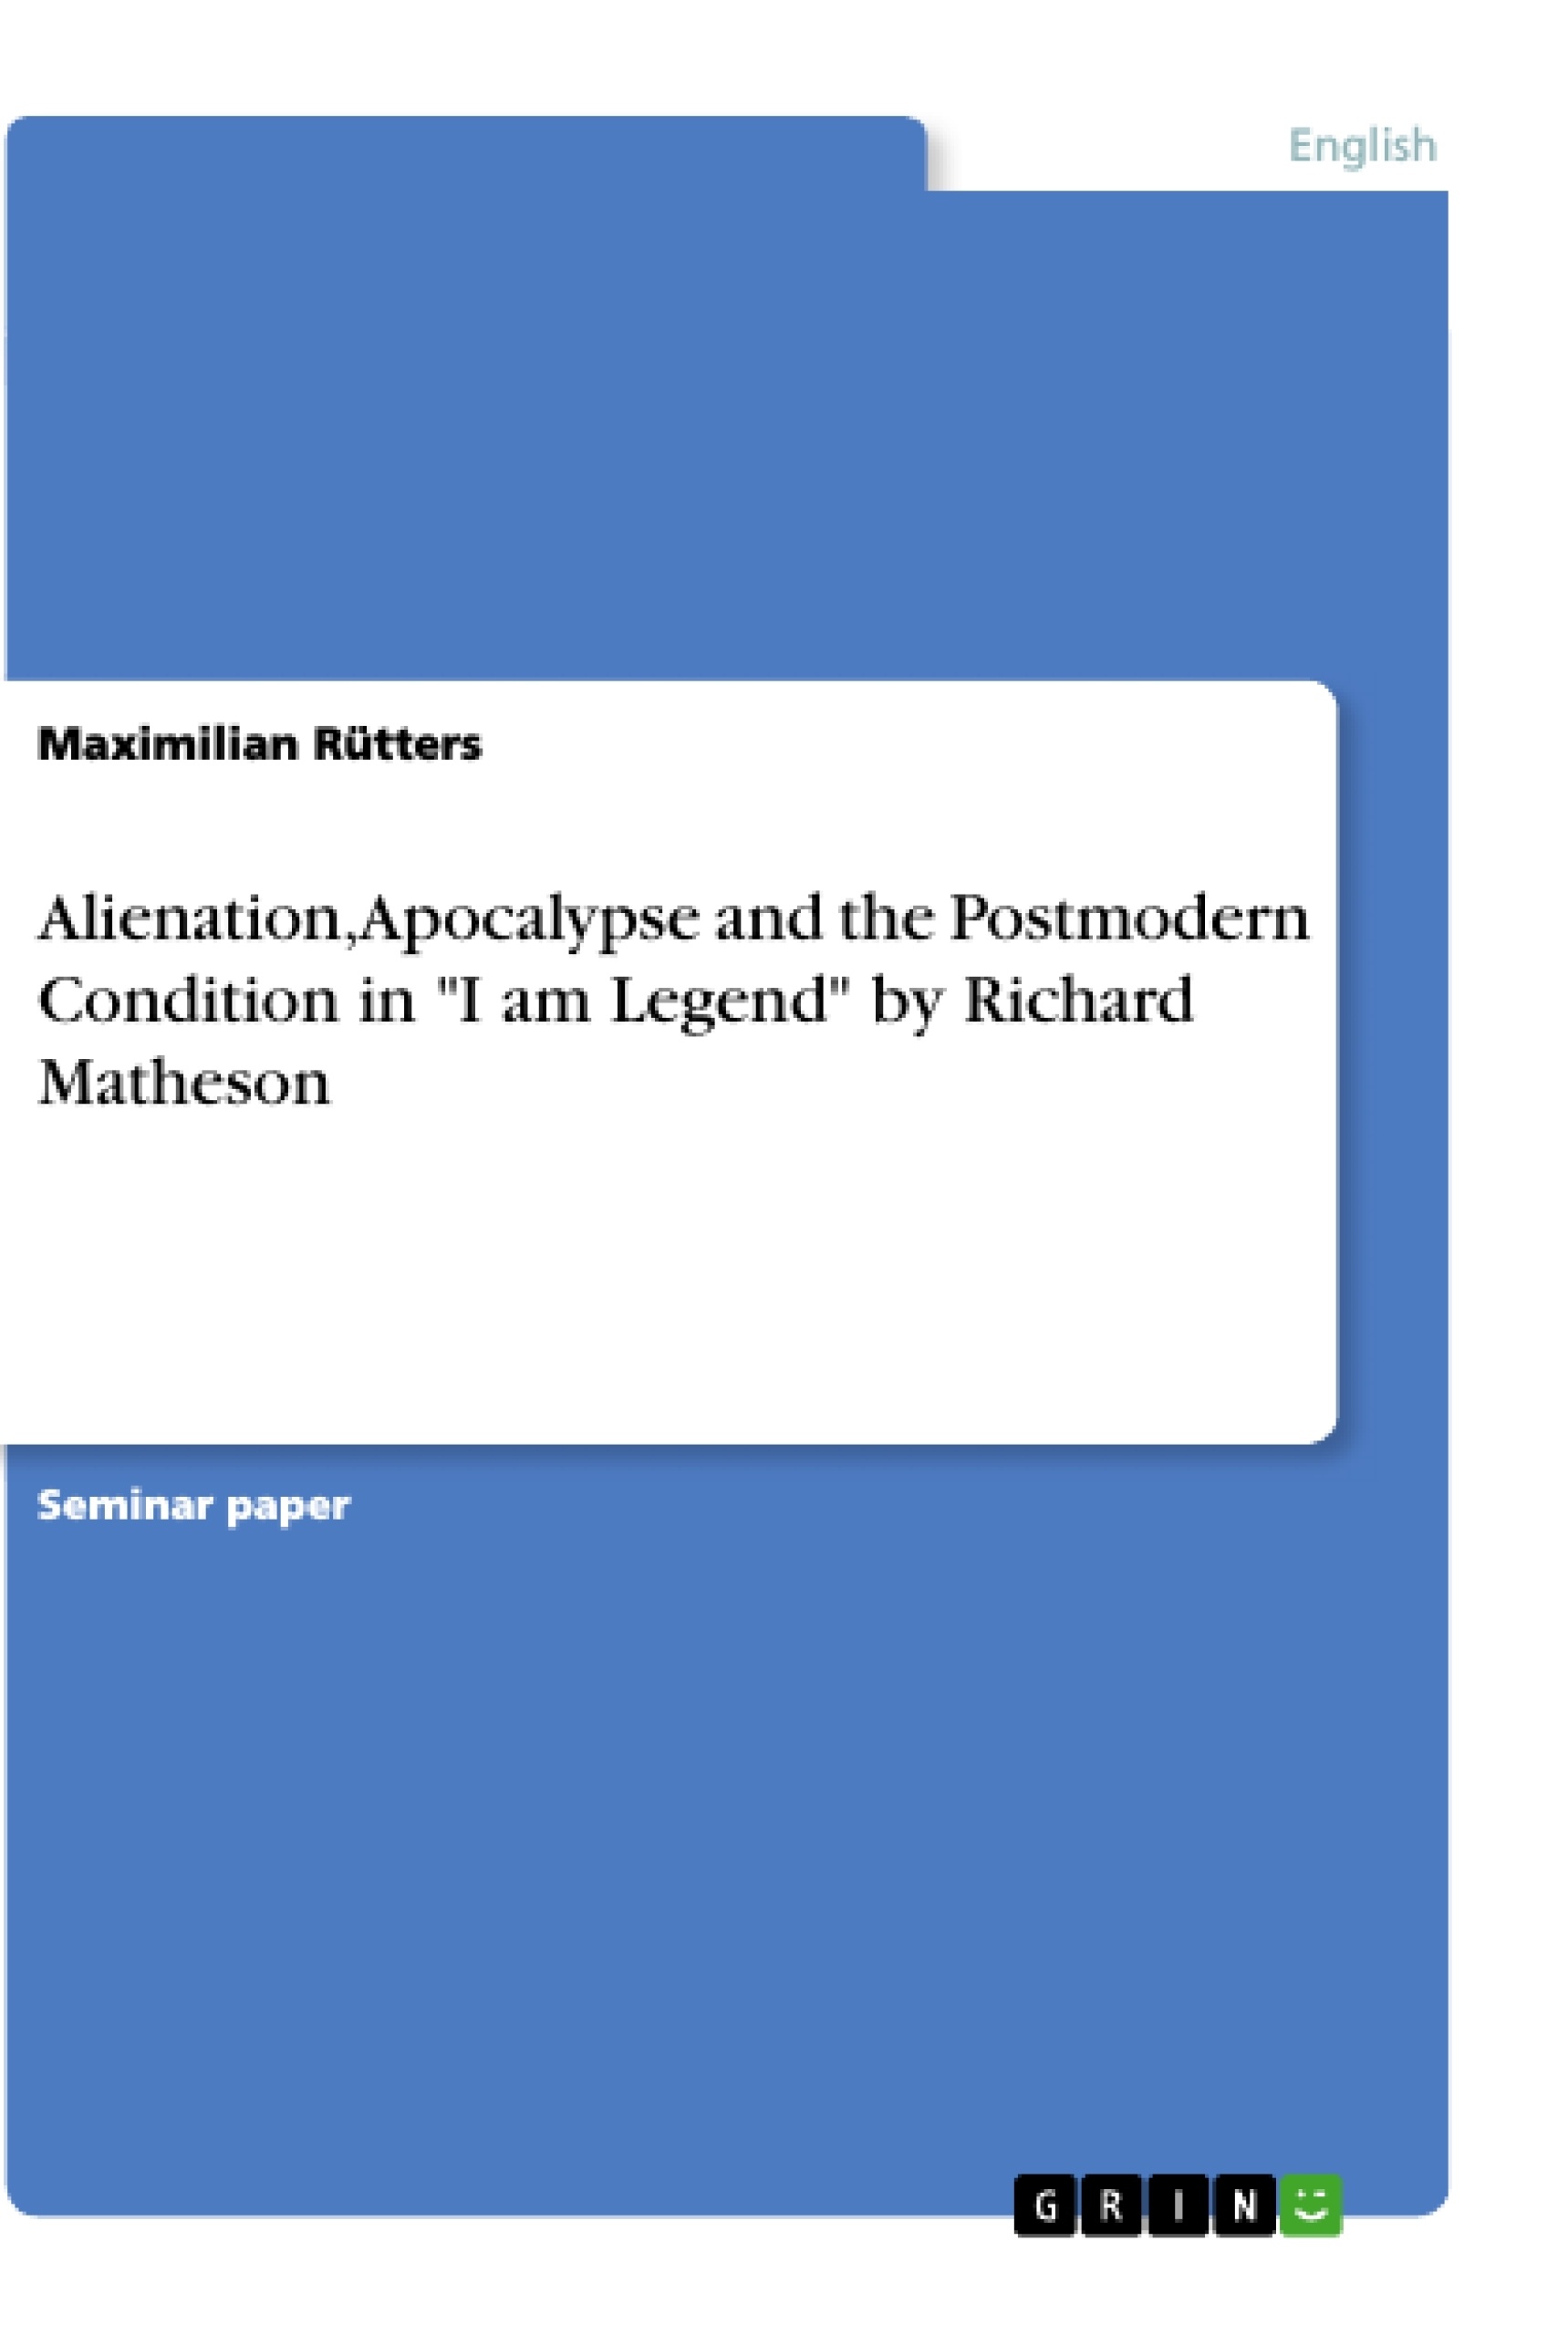 Title: Alienation, Apocalypse  and the Postmodern Condition in "I am Legend" by Richard Matheson